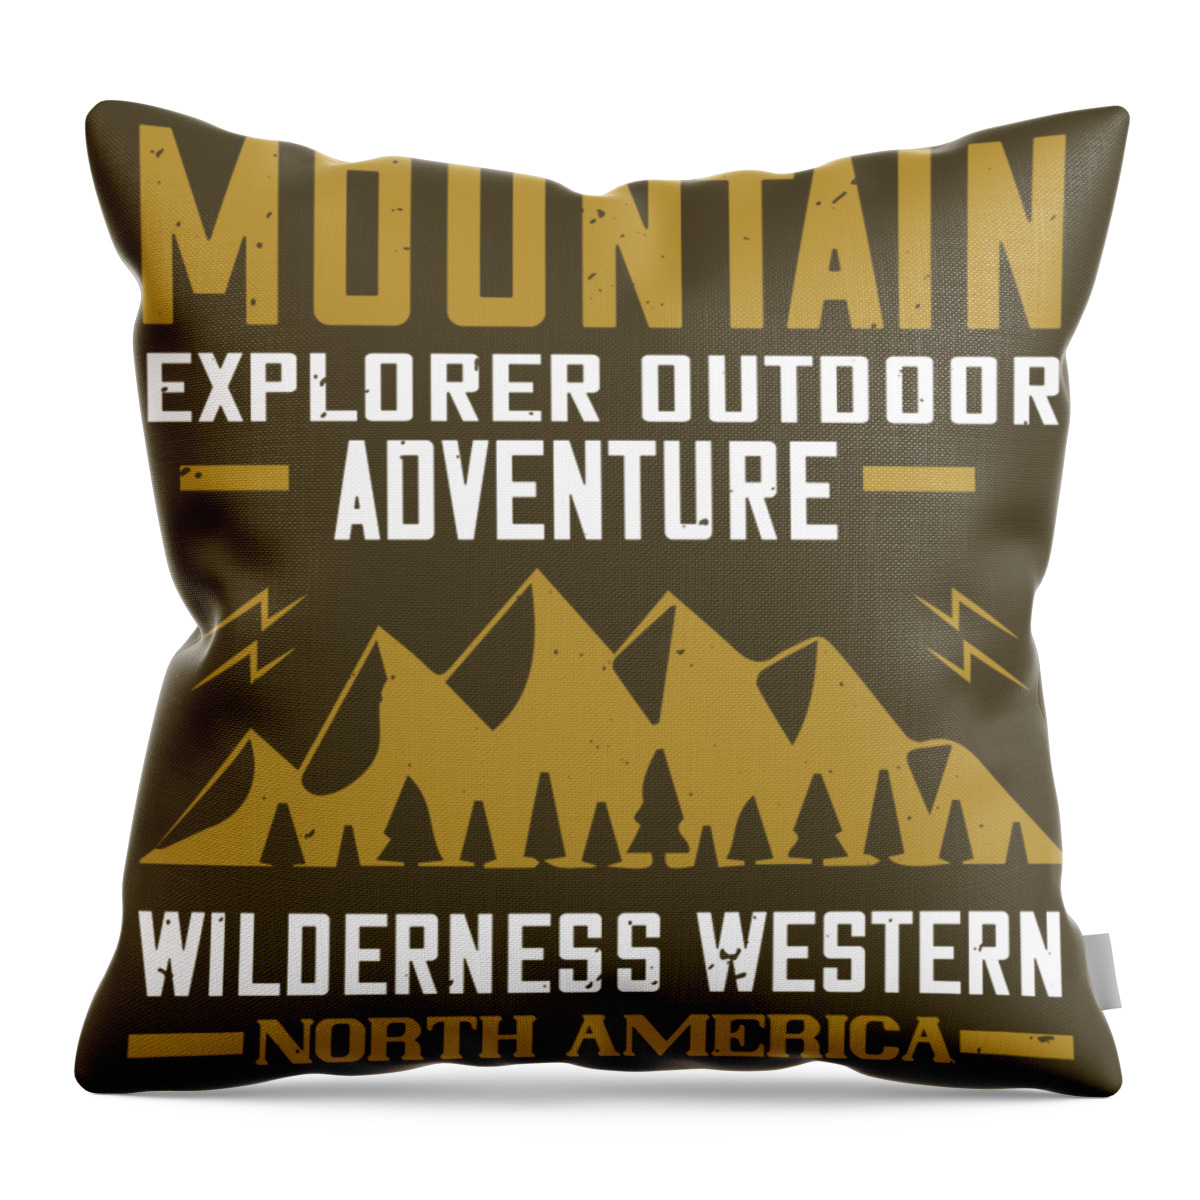 Hiking Throw Pillow featuring the digital art Hiking Gift Mountain Explorer Outdoor Adventure Wilderness Western North America by Jeff Creation